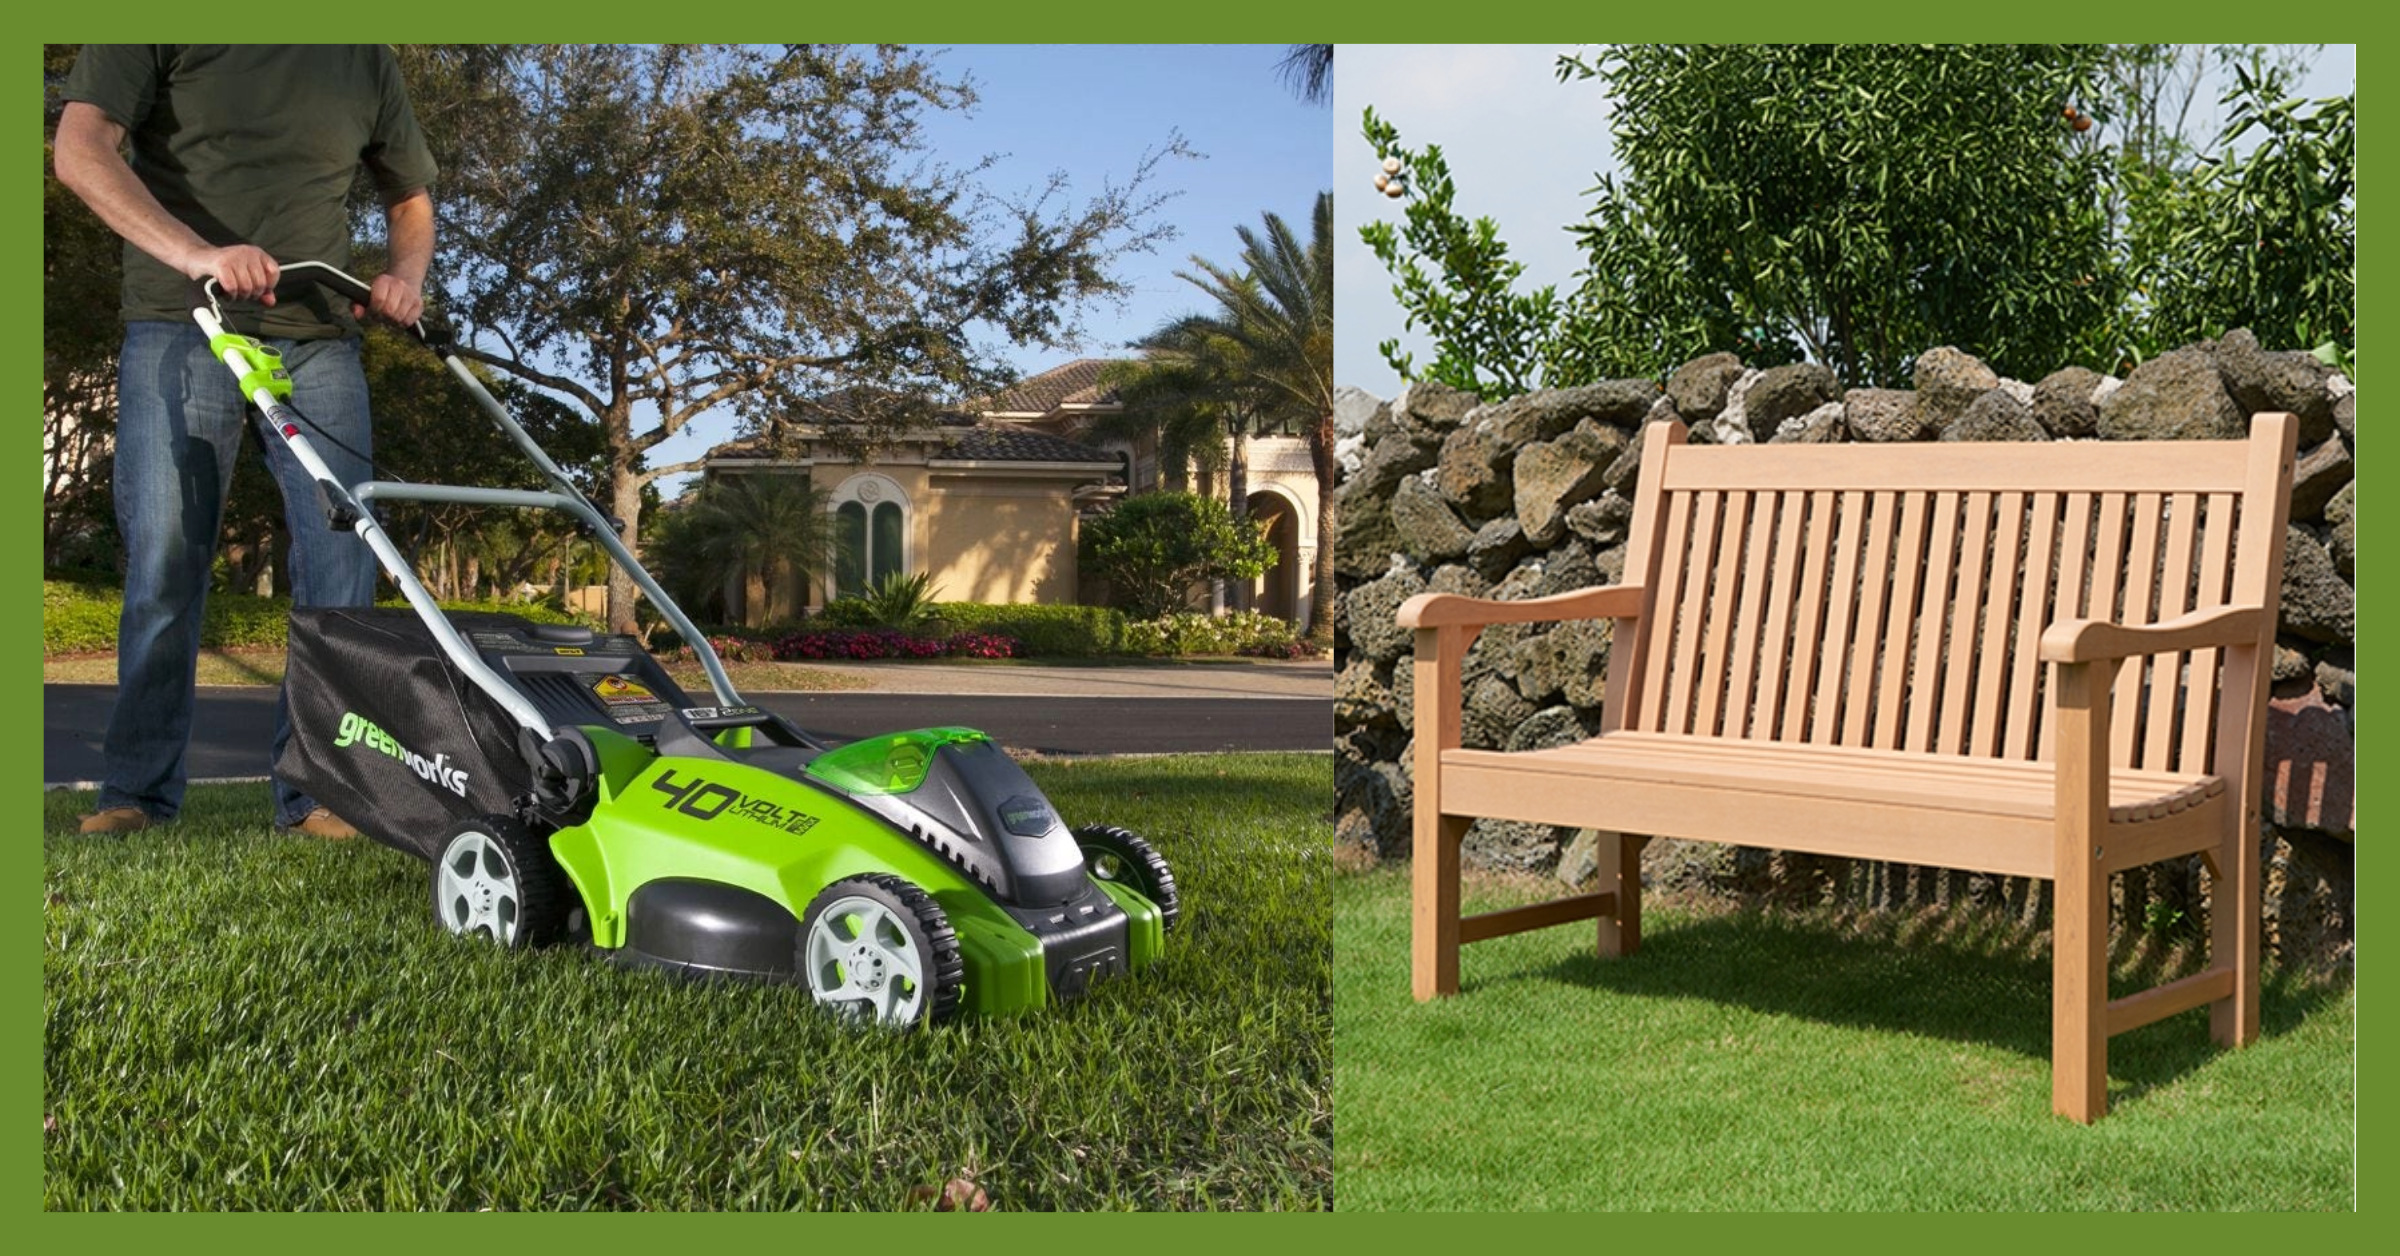 Best lawn and garden deals during Amazon's Big Spring Sale 